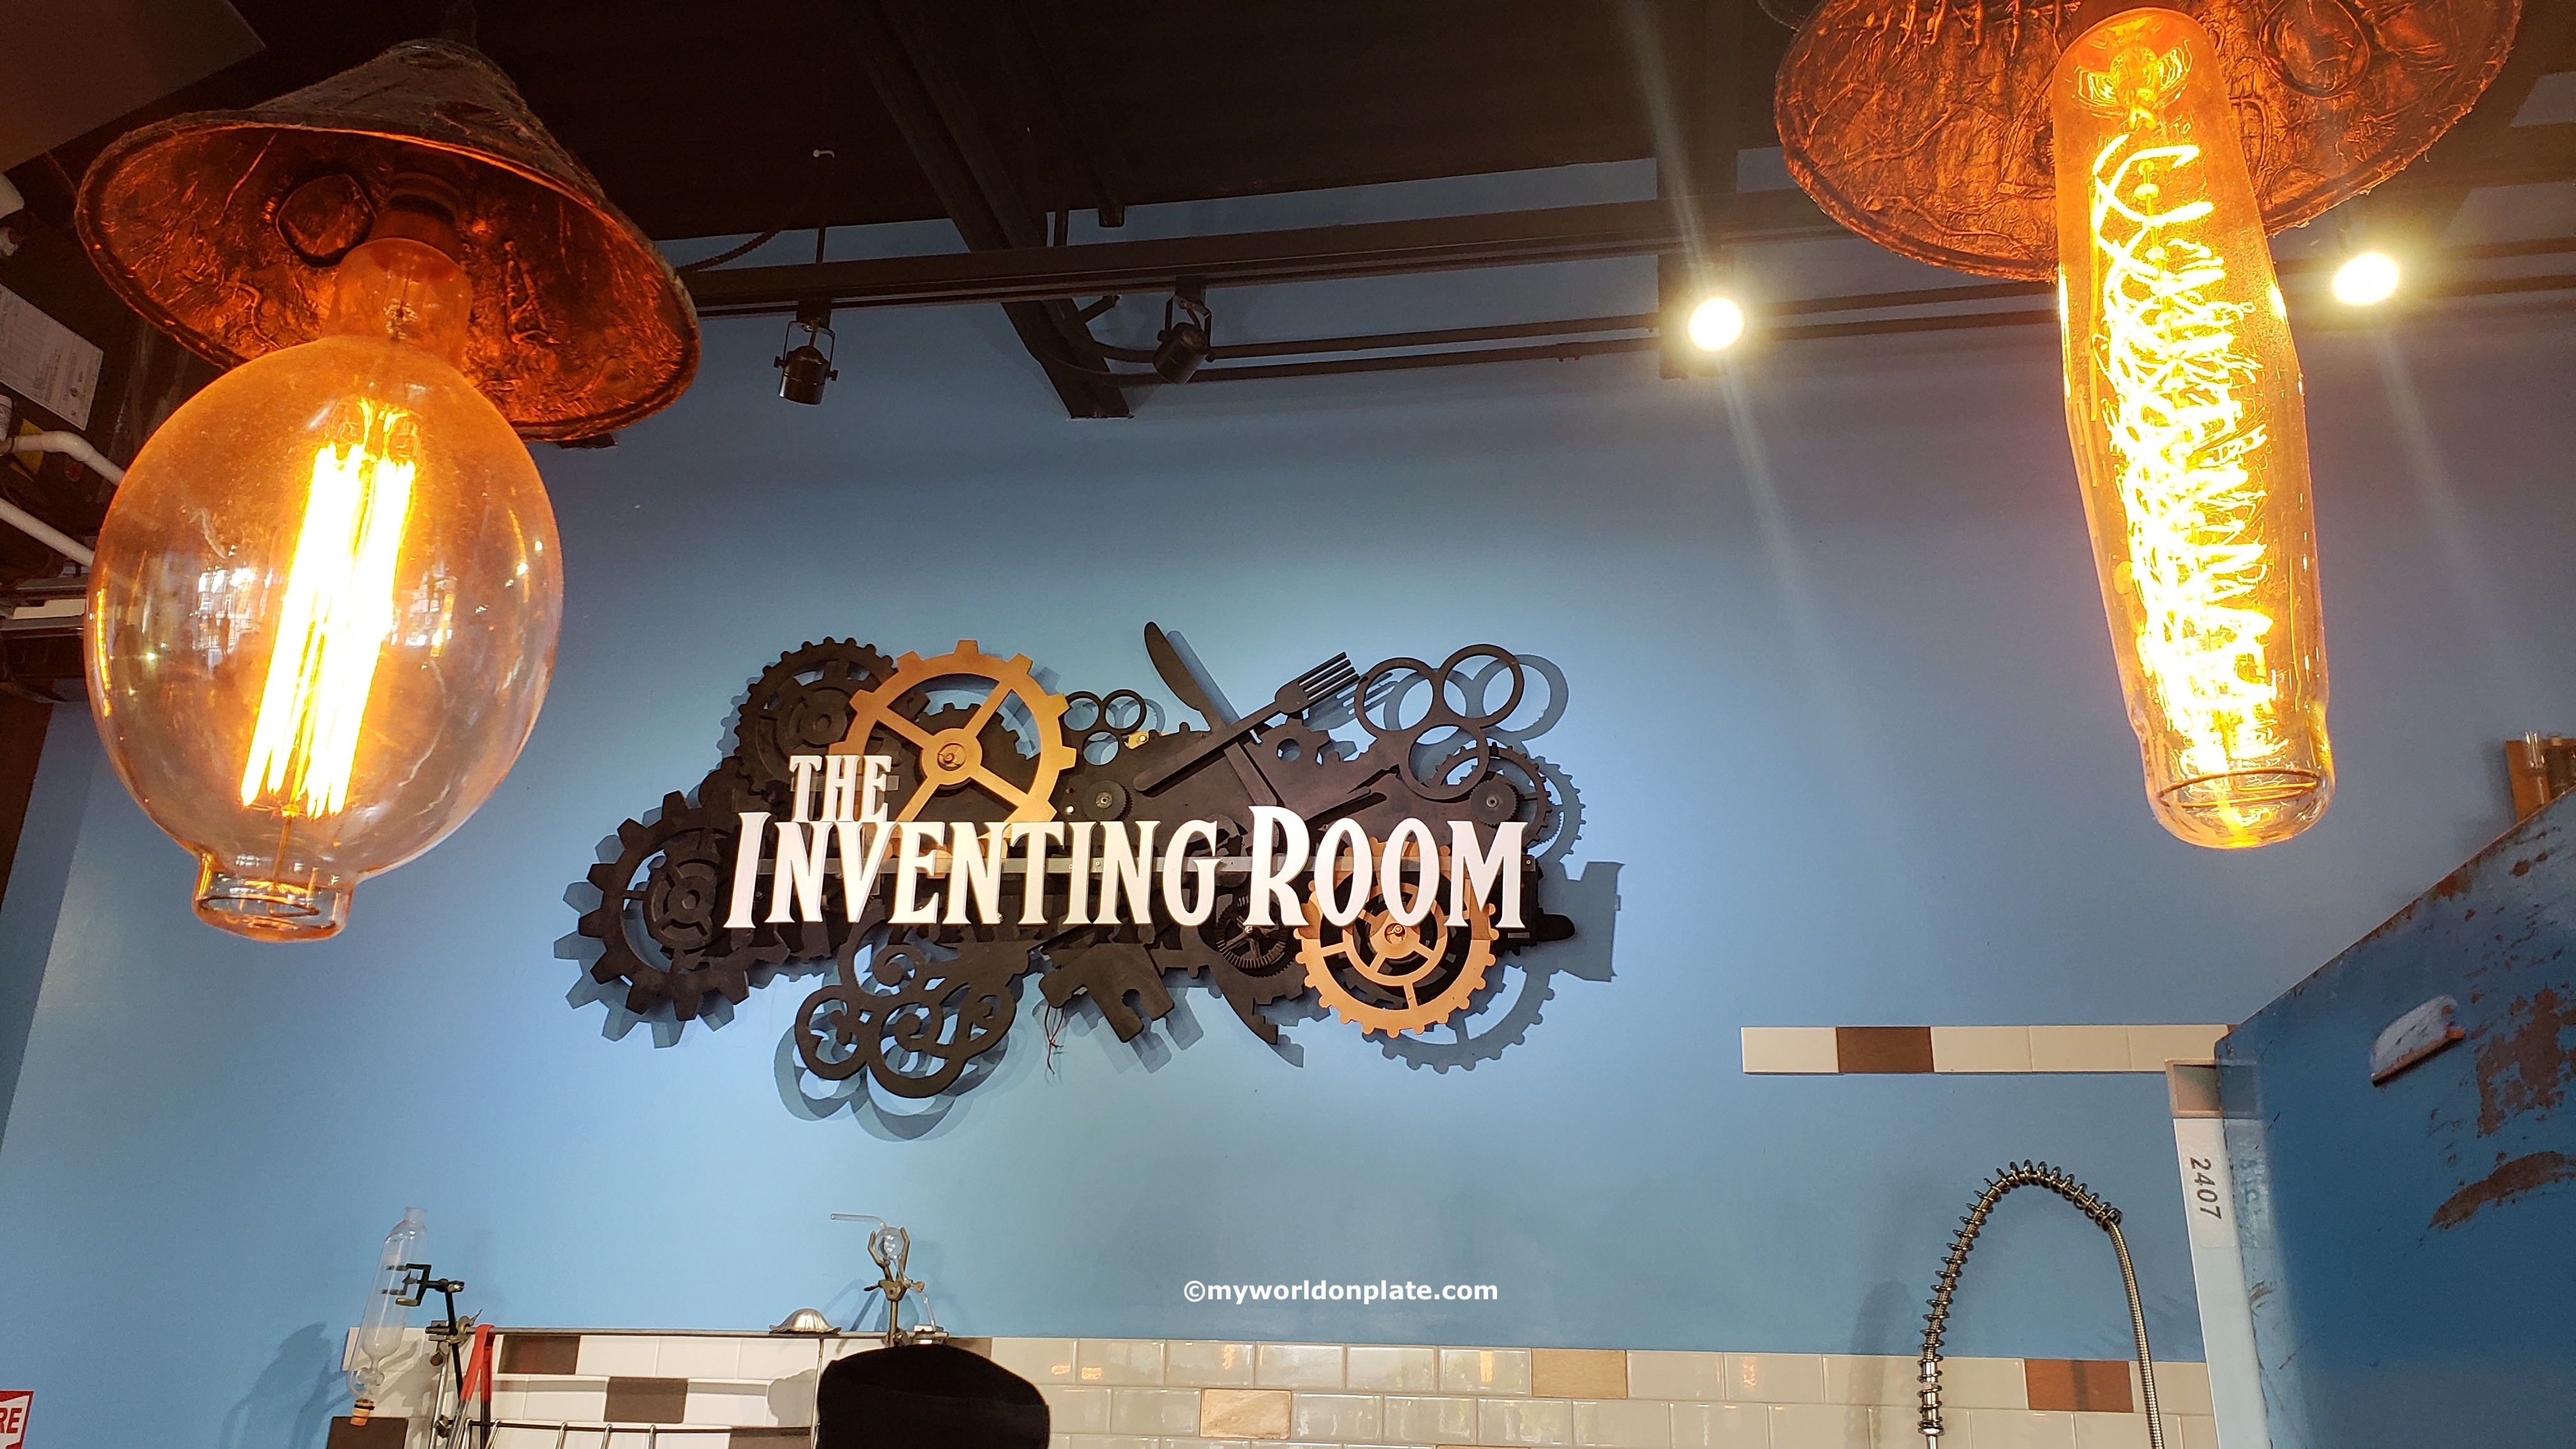 The Inventing Room